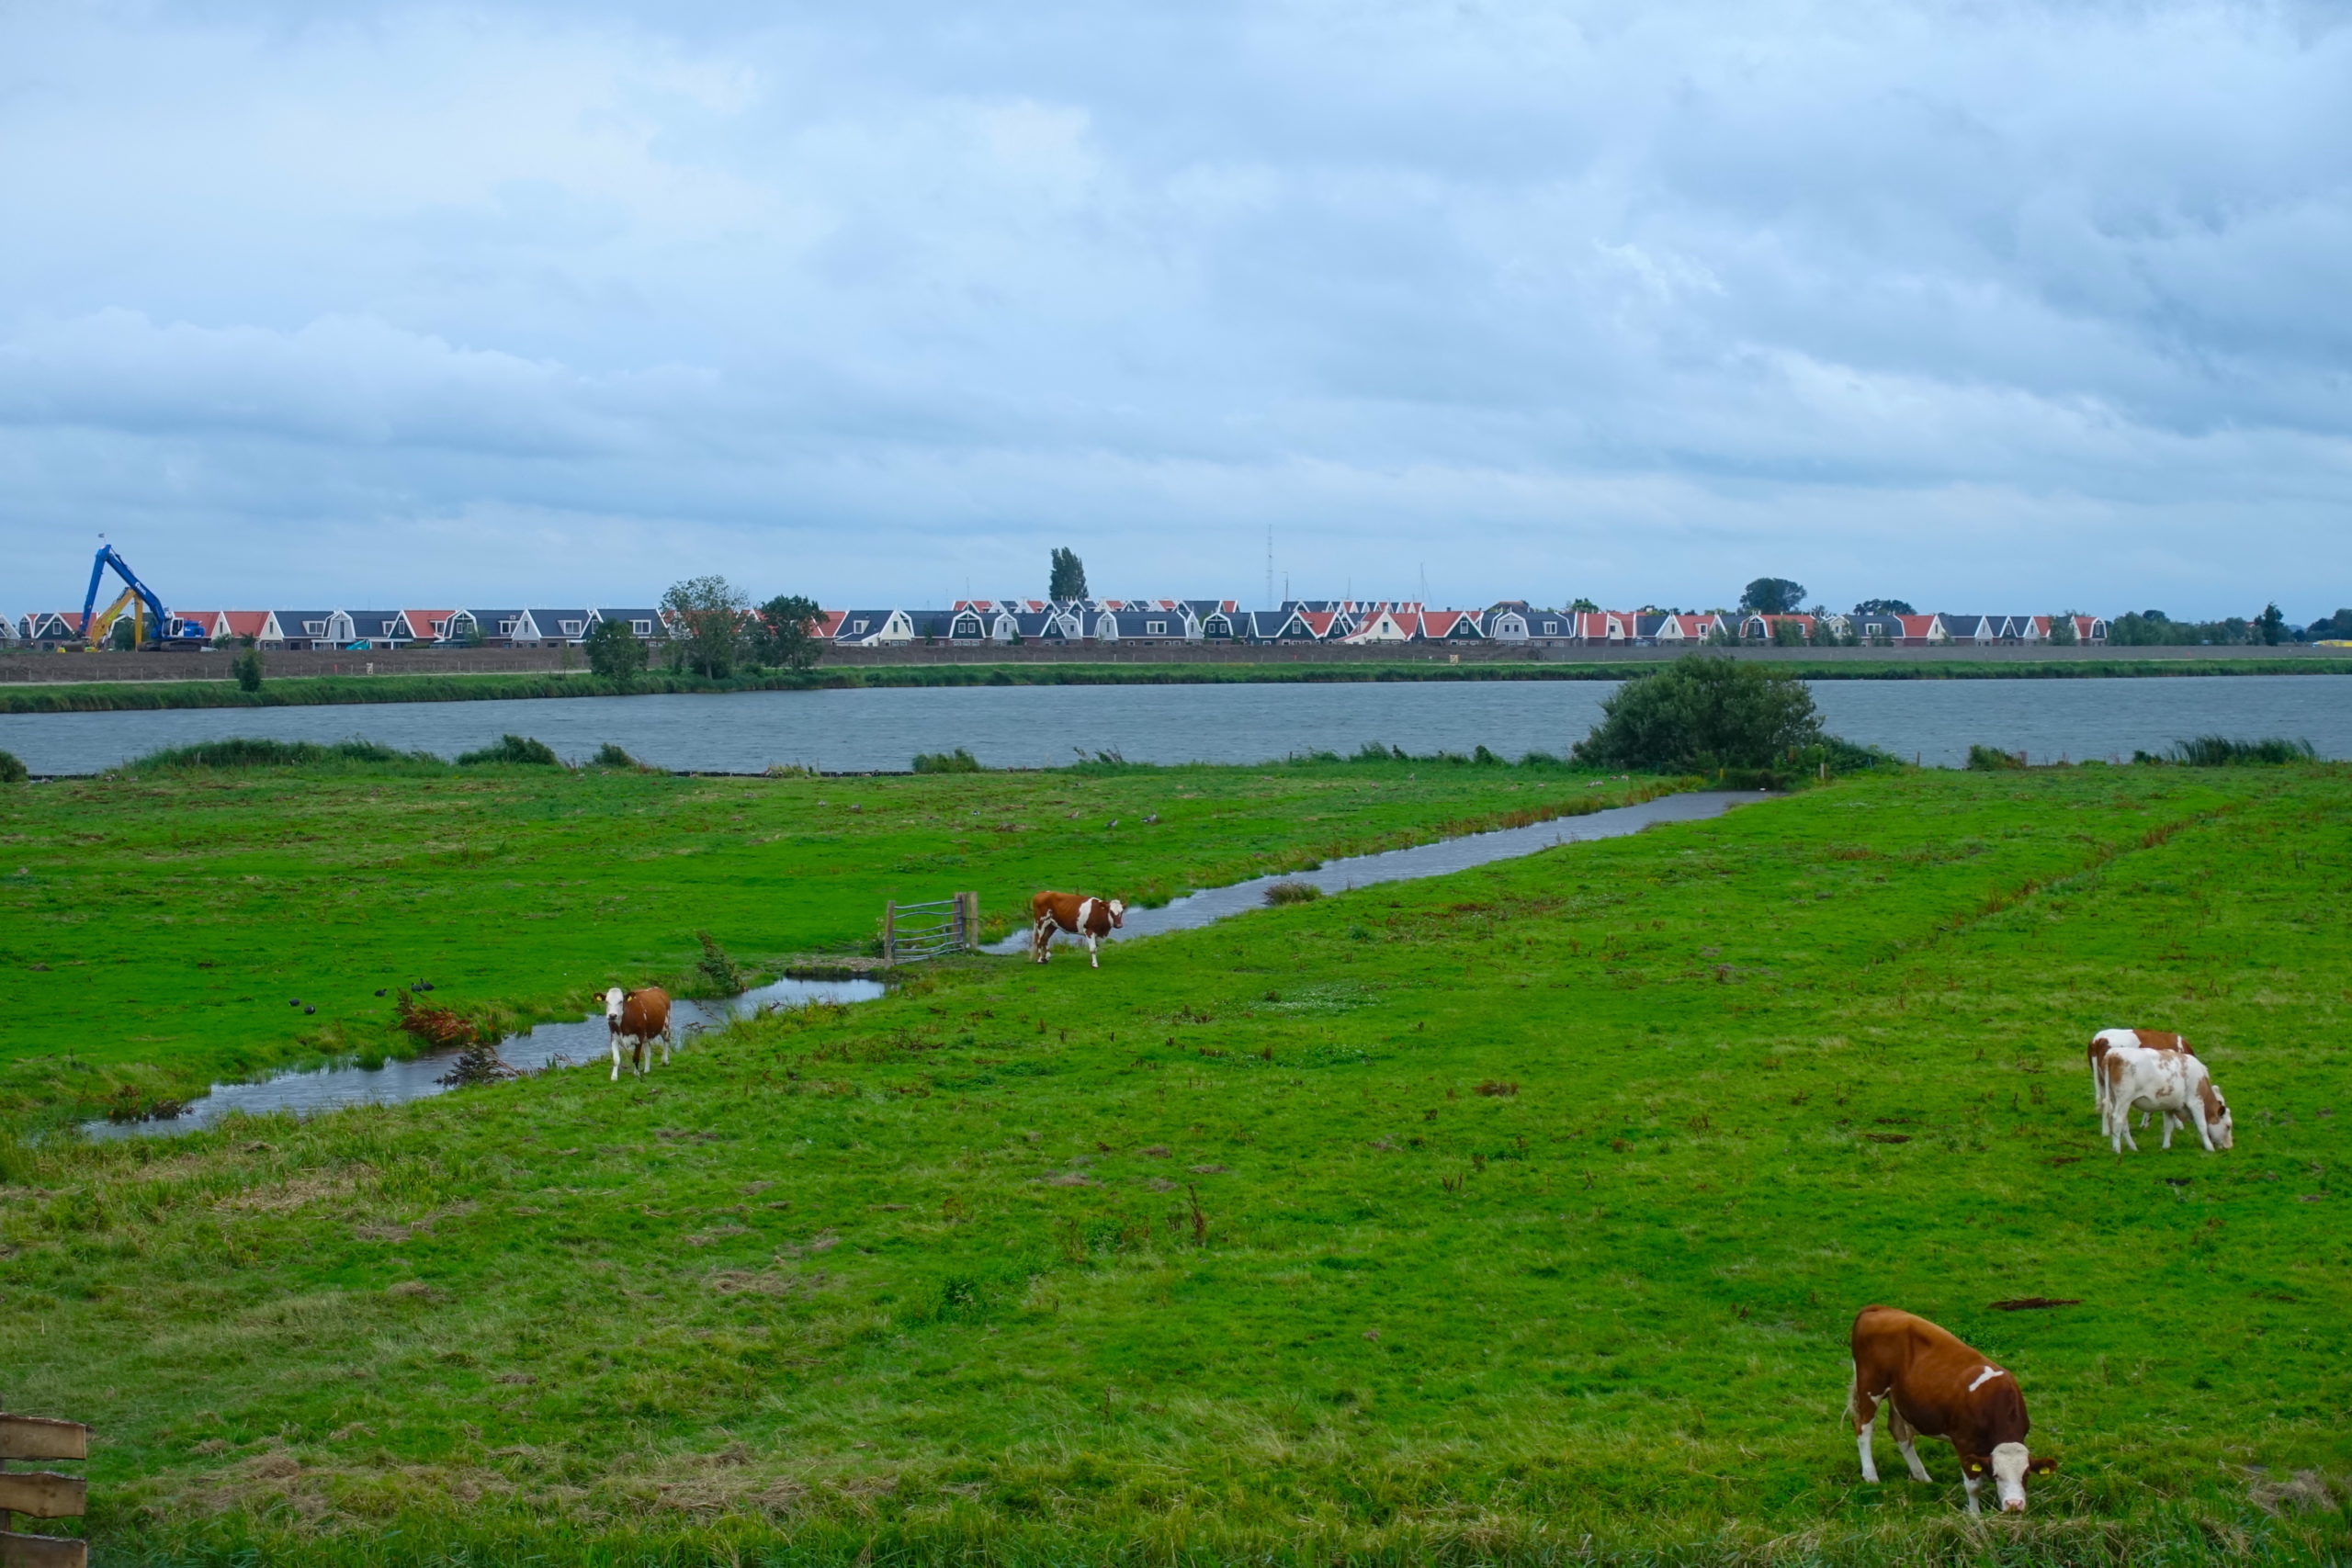 View of some cows, water, meadows and the houses of Uitdam on the Dutch countryside on the way to Marken